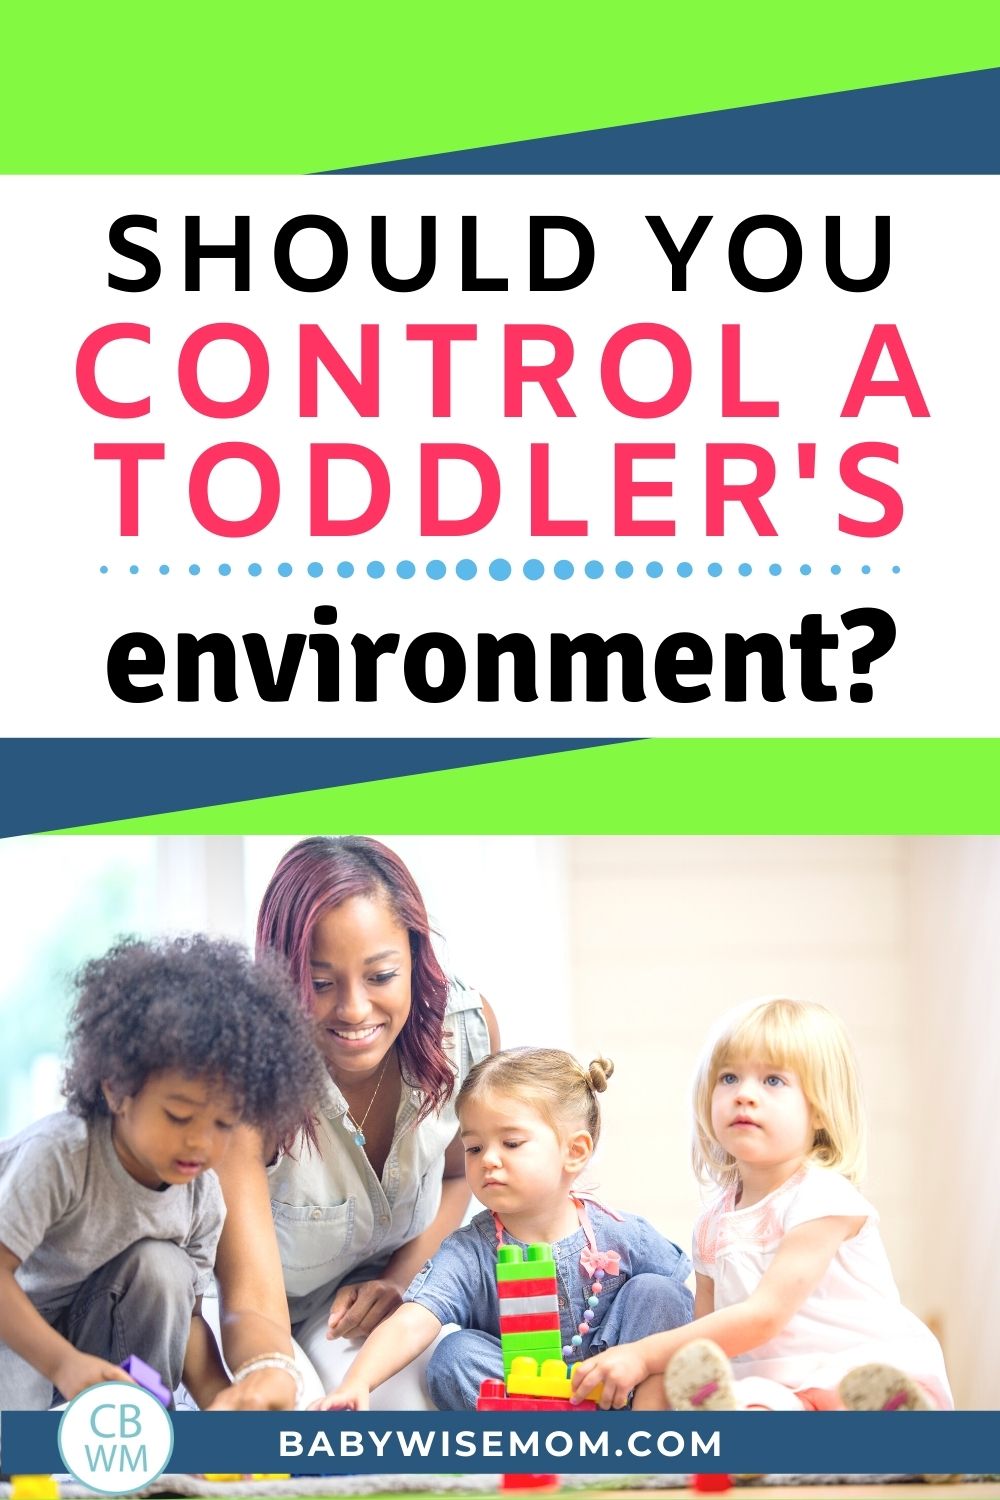 should you control a toddler's environment